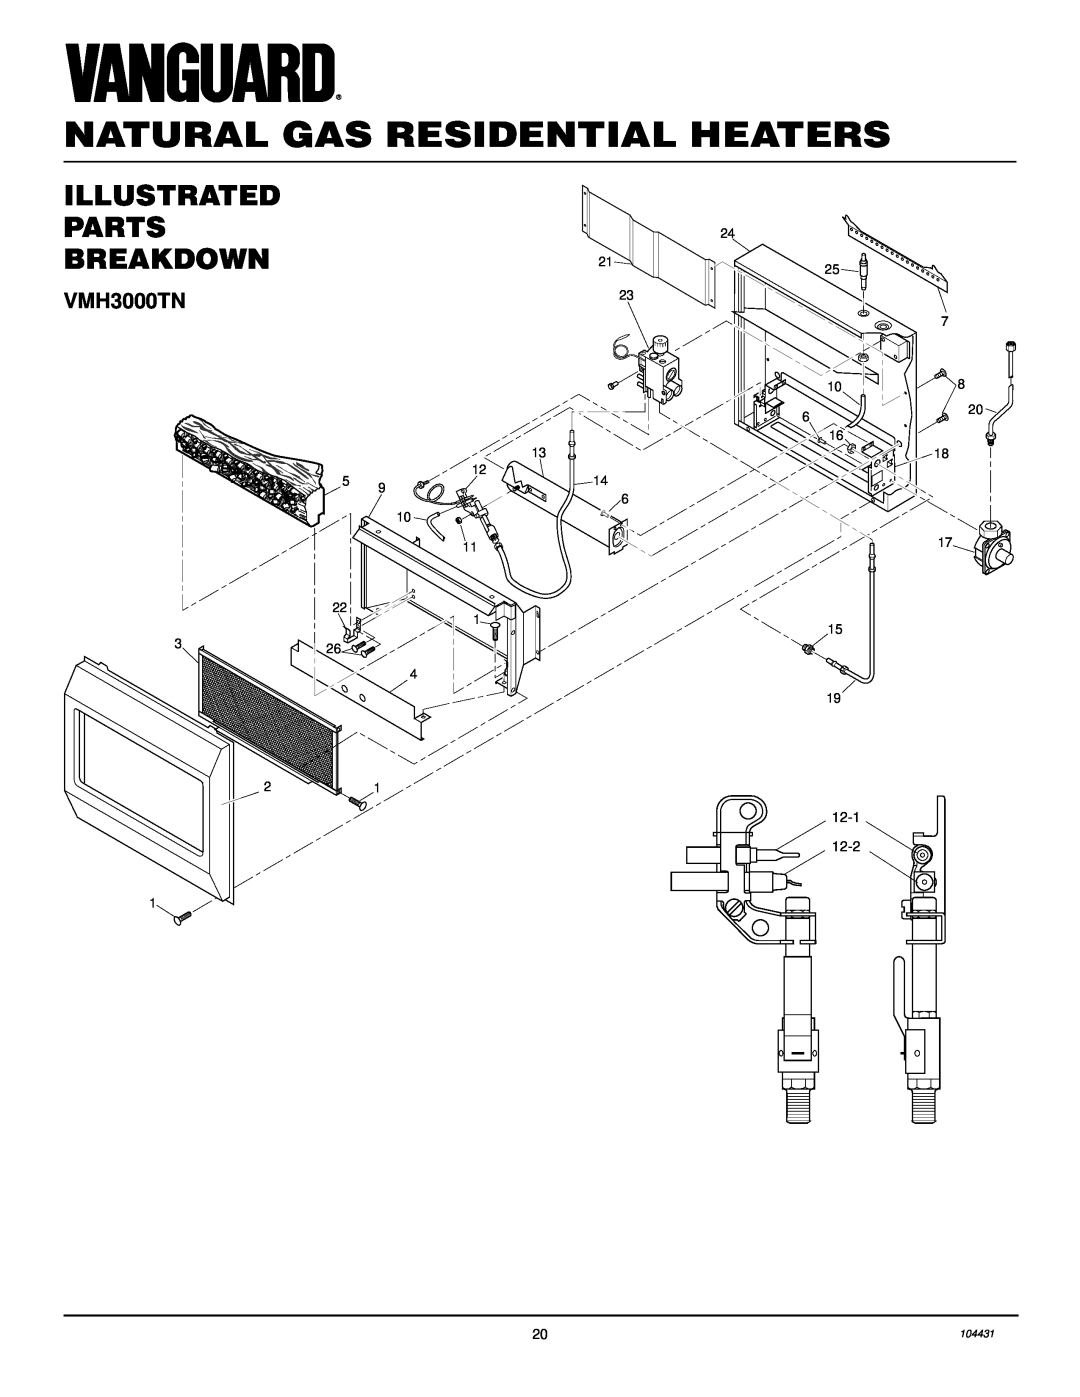 Vanguard Heating VMH3000TN installation manual ILLUSTRATED PARTS BREAKDOWN21, Natural Gas Residential Heaters 